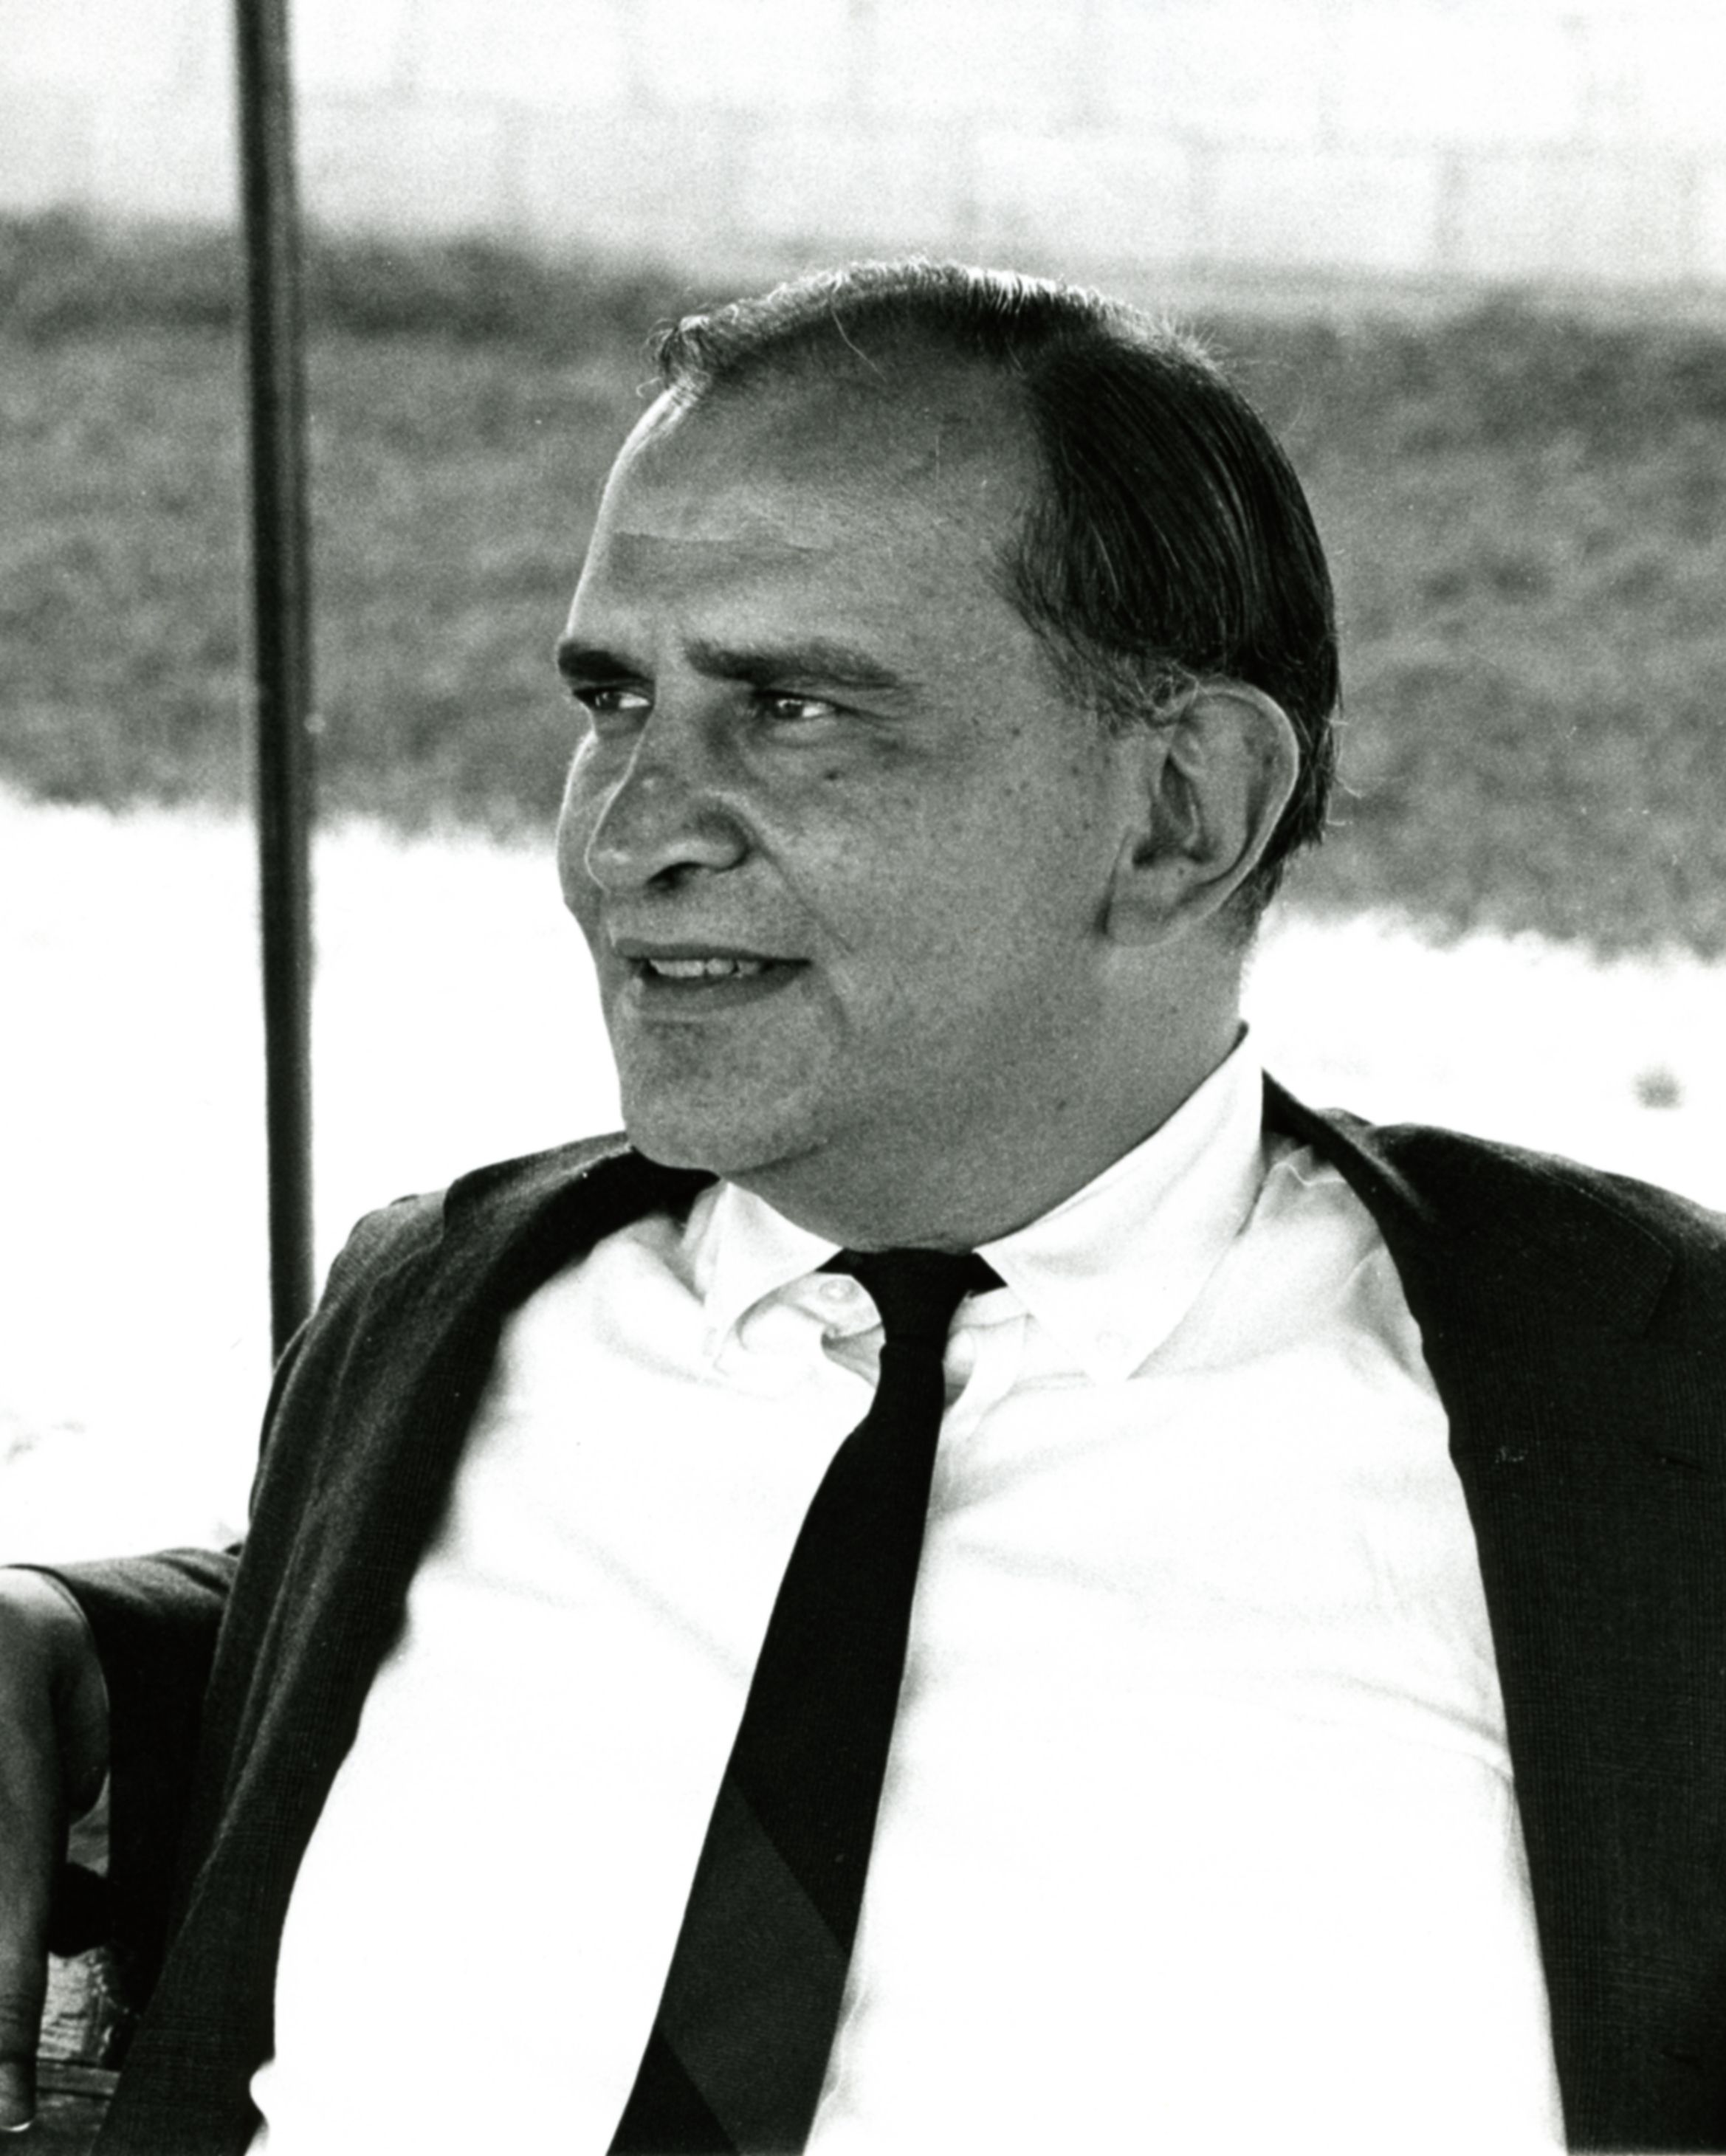 John R. Gaines in 1968 (Keeneland Library Thoroughbred Times Collection)